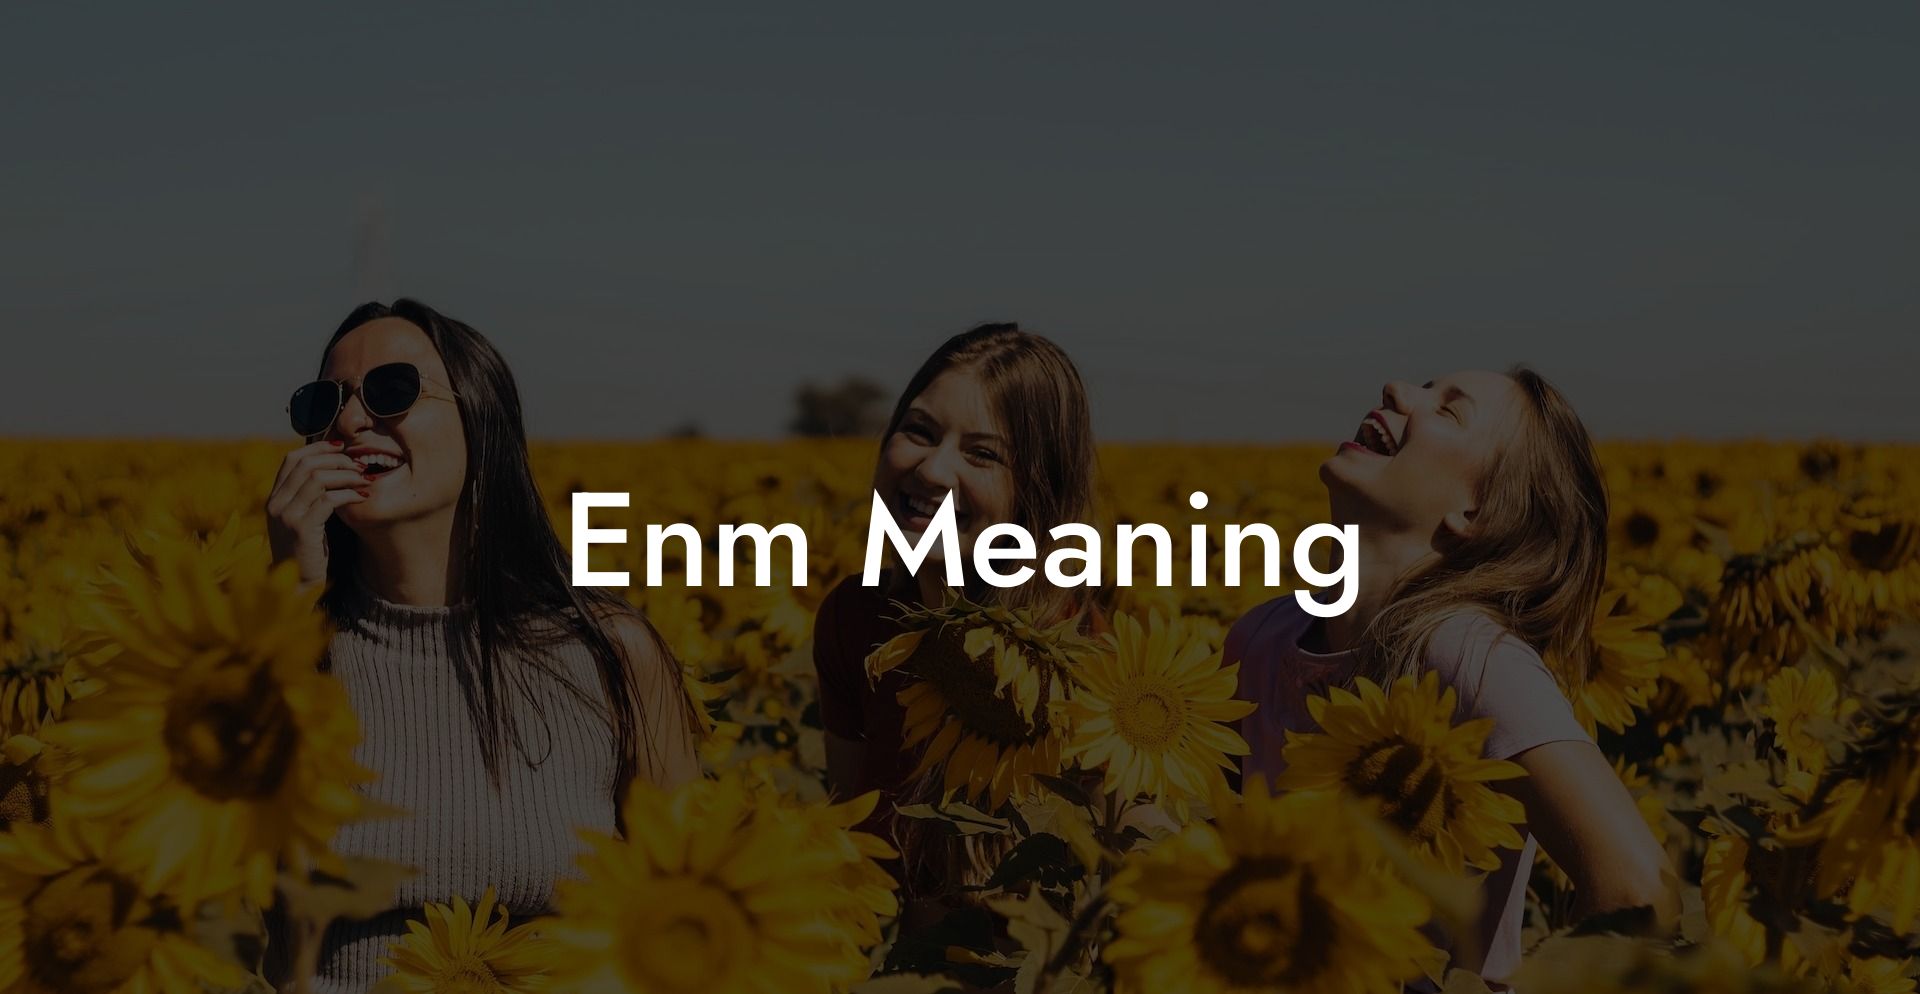 Enm Meaning